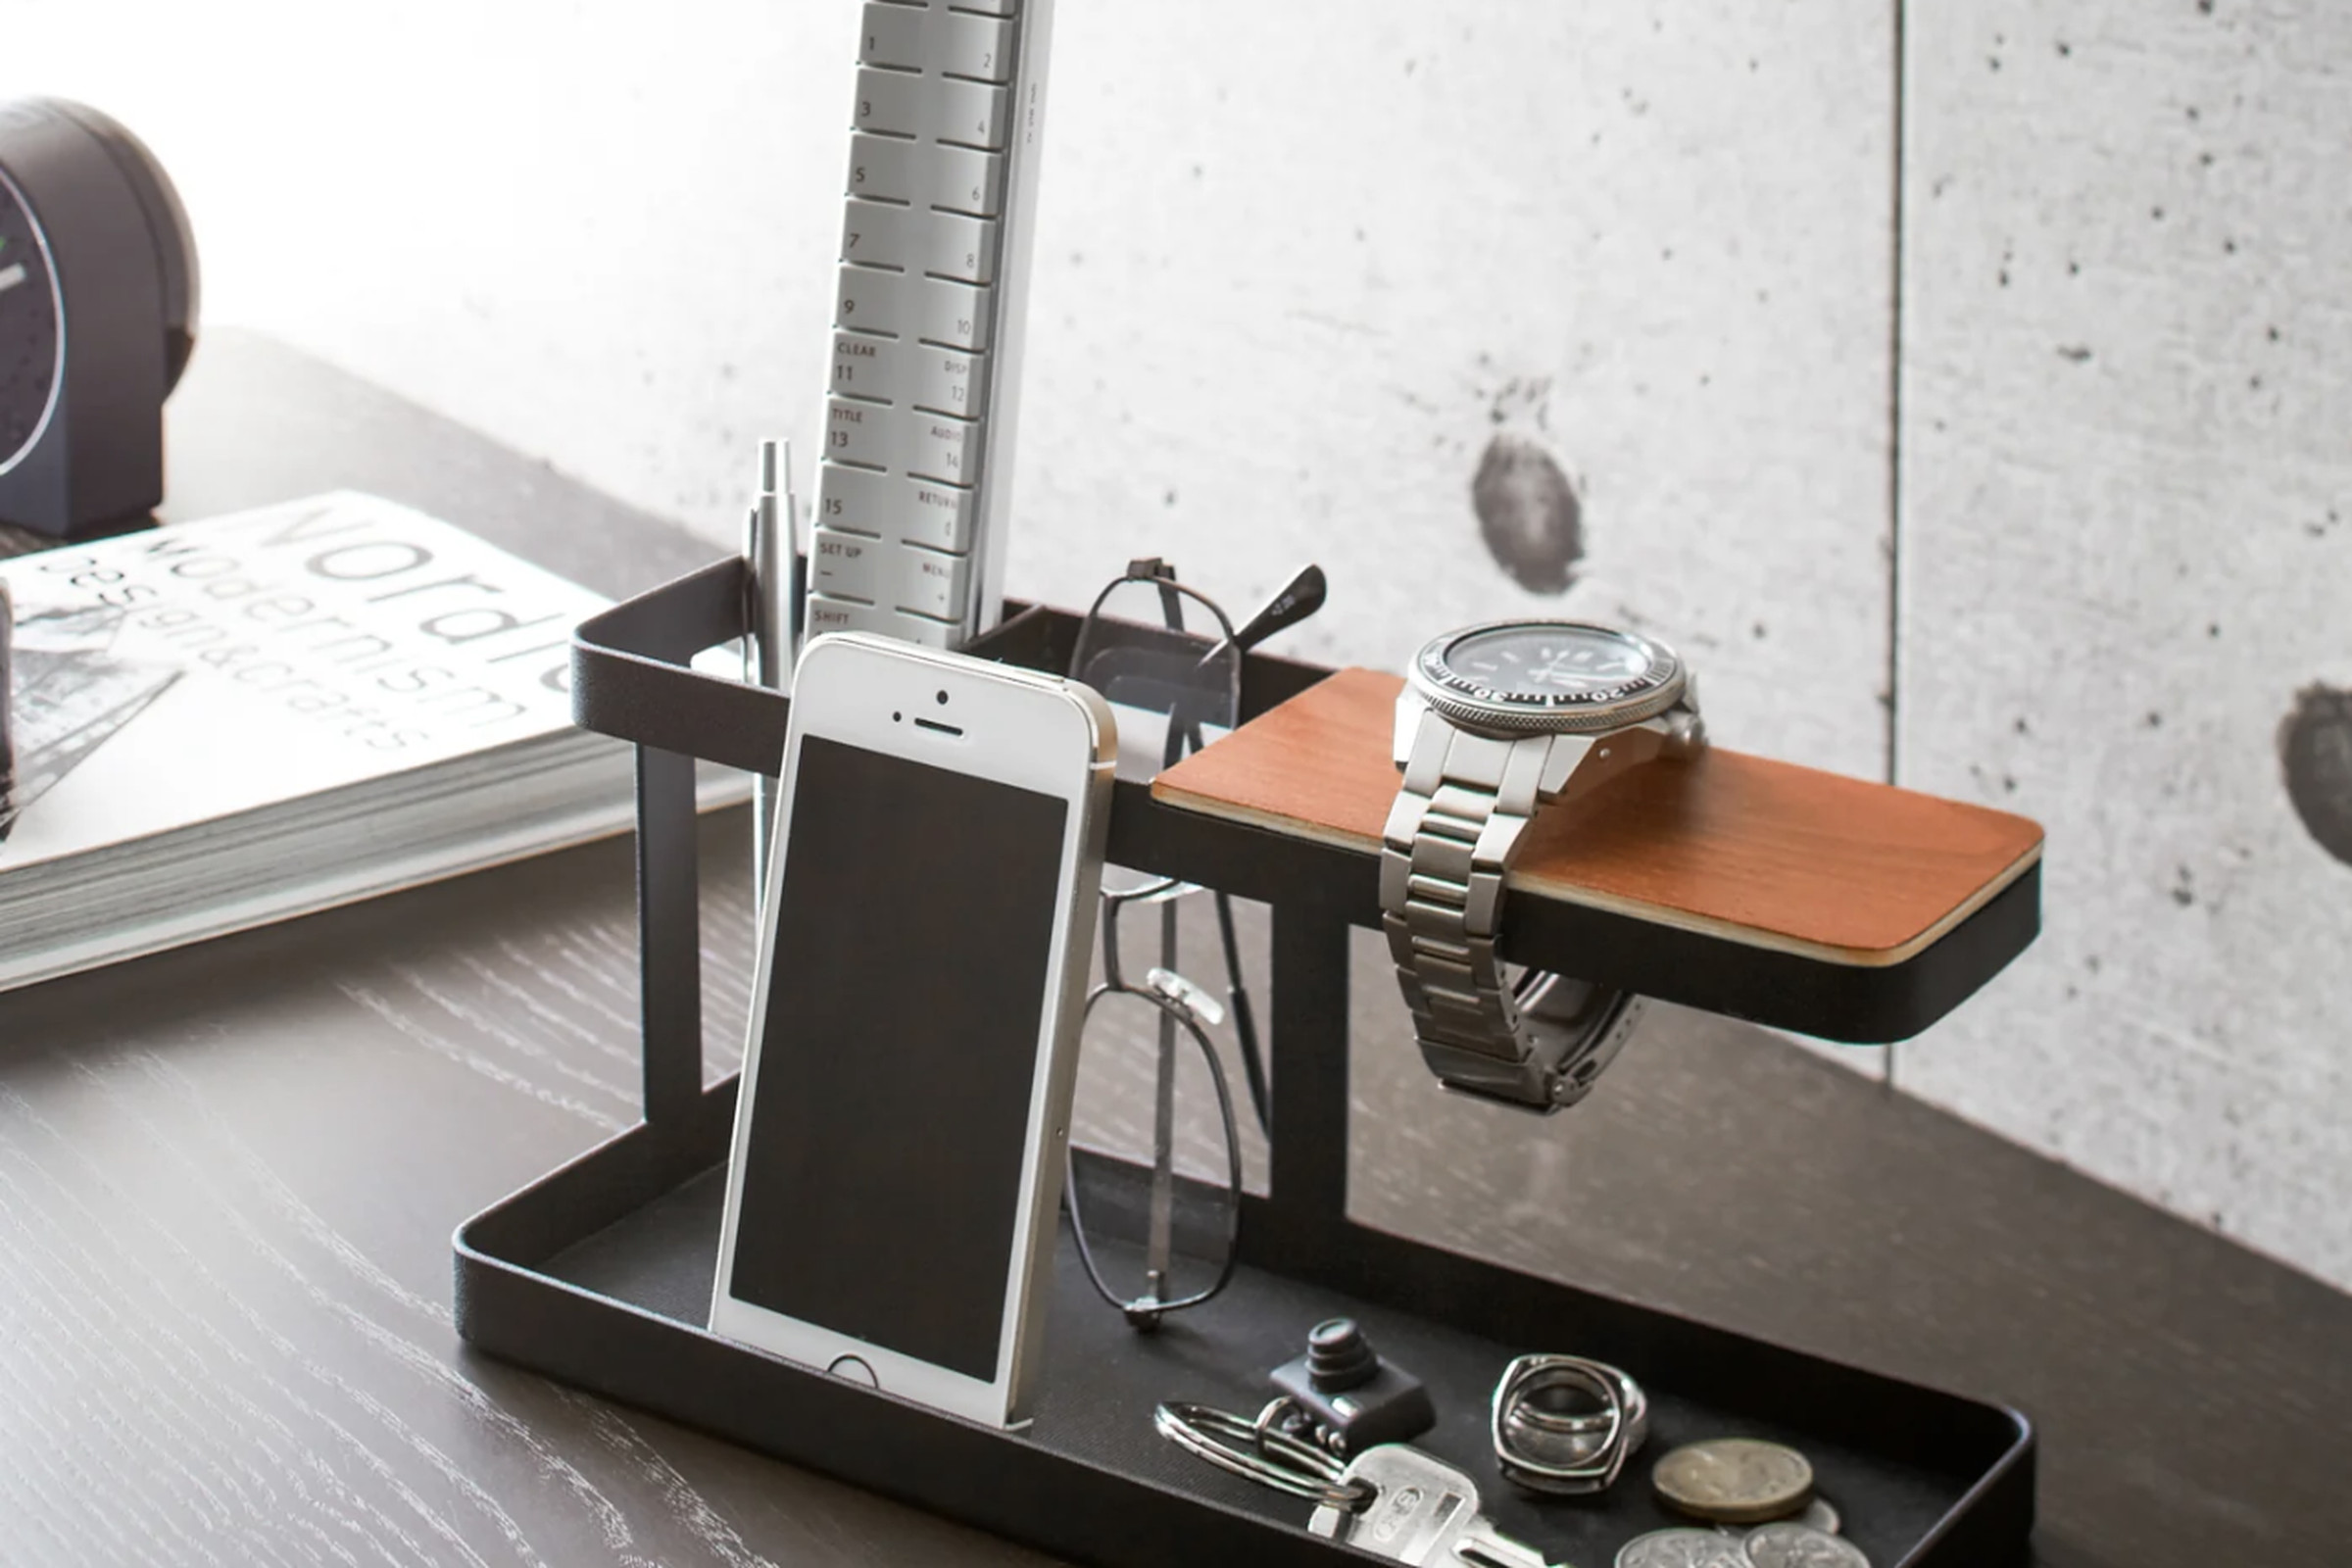 Black and brown two-level desk organizer loaded with small stuff like a phone, a watch, and a pair of glasses.